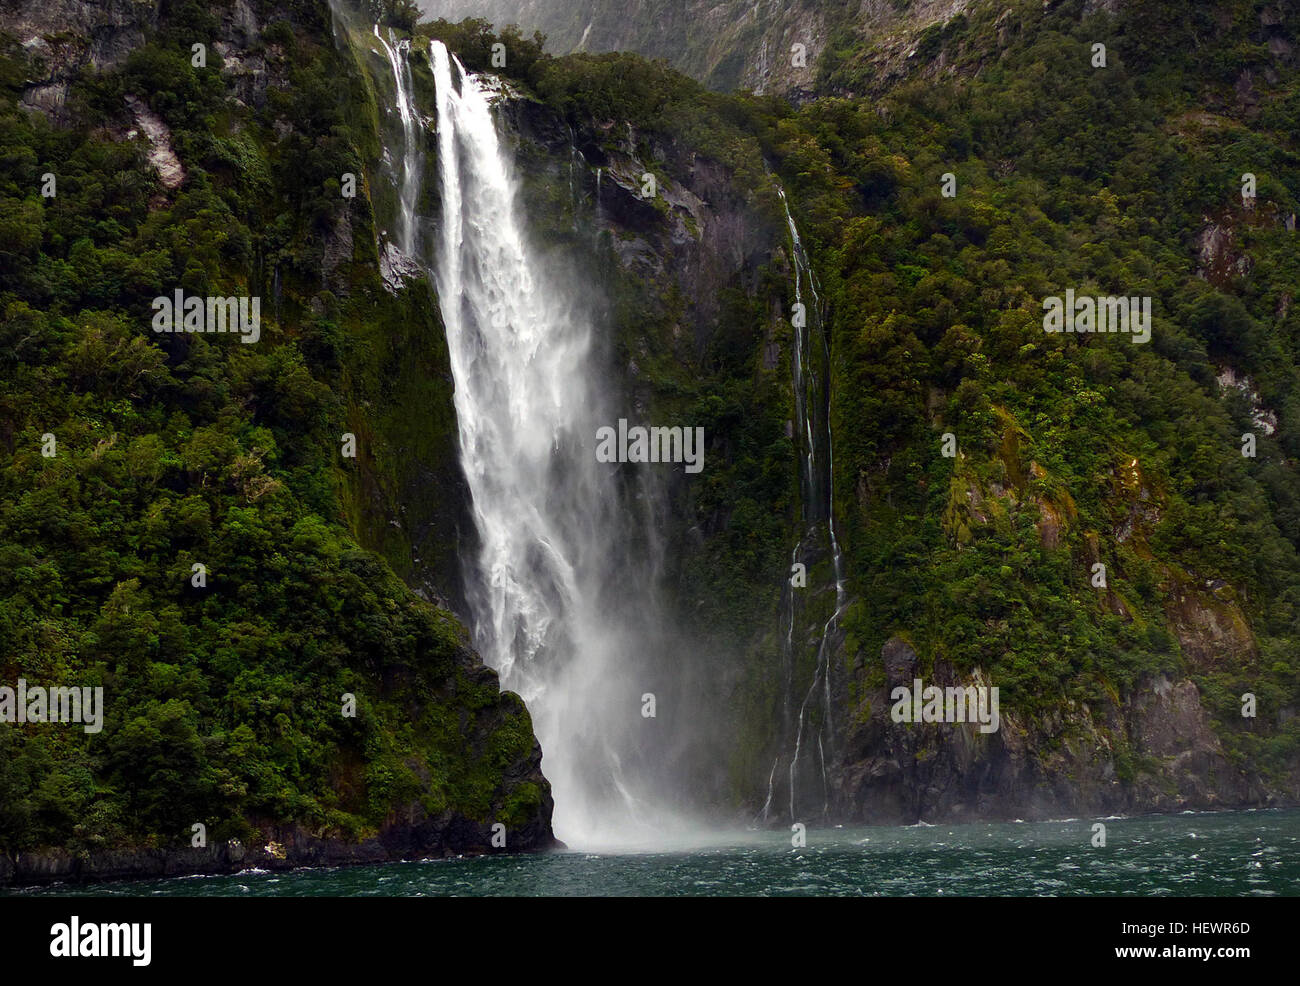 One of the Must See New Zealand Waterfalls, Stirling Falls, second name Waimanu Falls, is the most magnificent waterfall in the world's famous Milford Sound. Accessible via a Milford Sound Cruise or Milford Sound Scenic Flight. Stock Photo